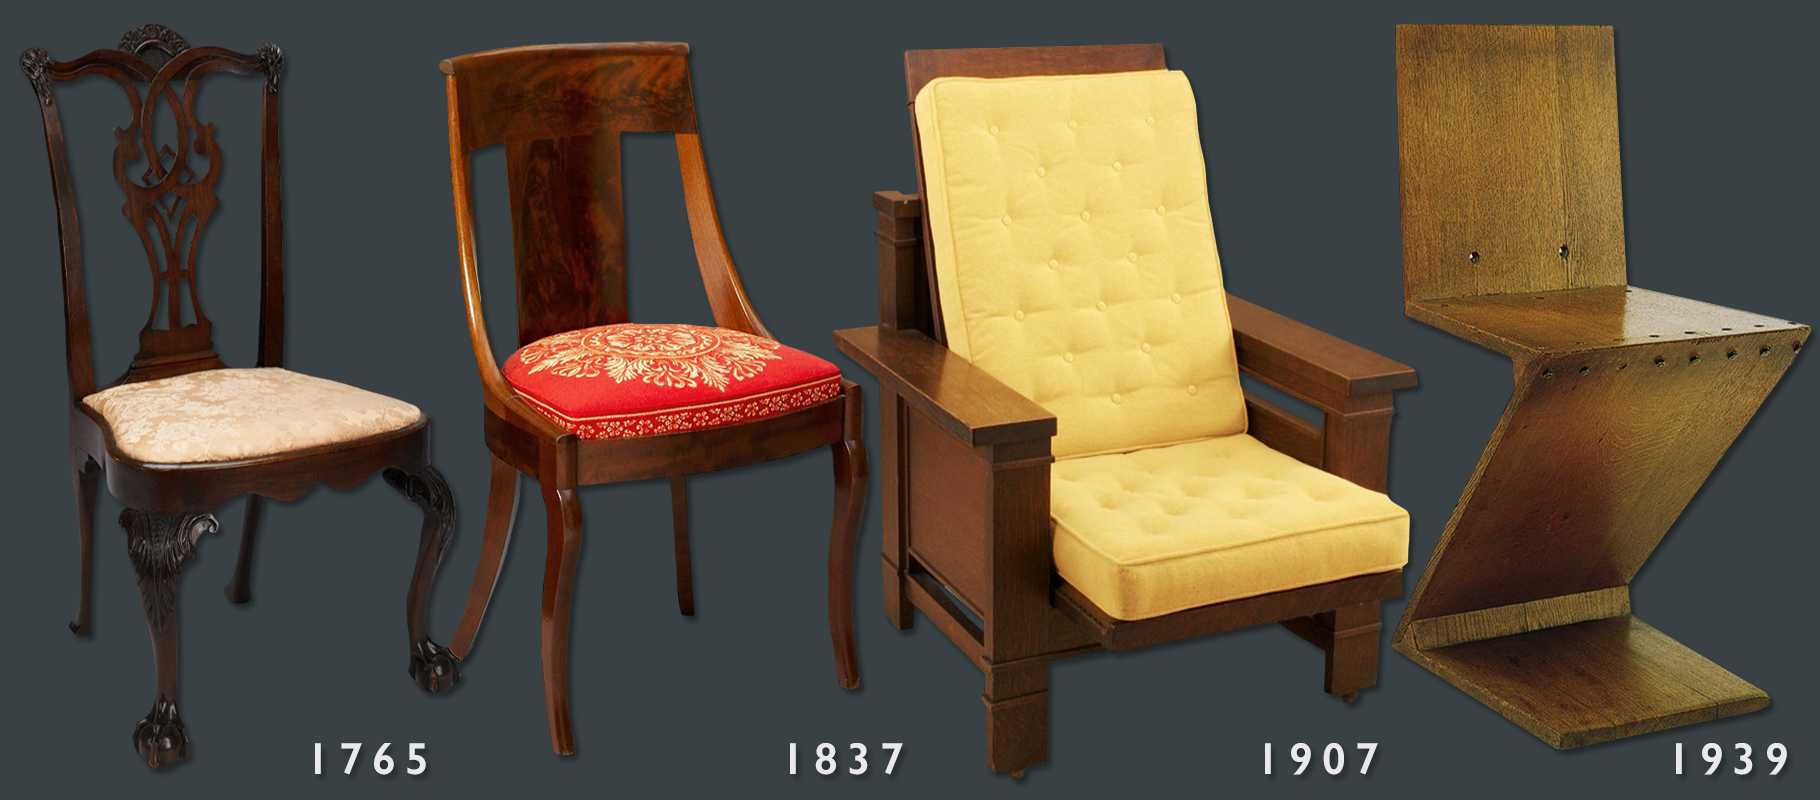 Chairs through time